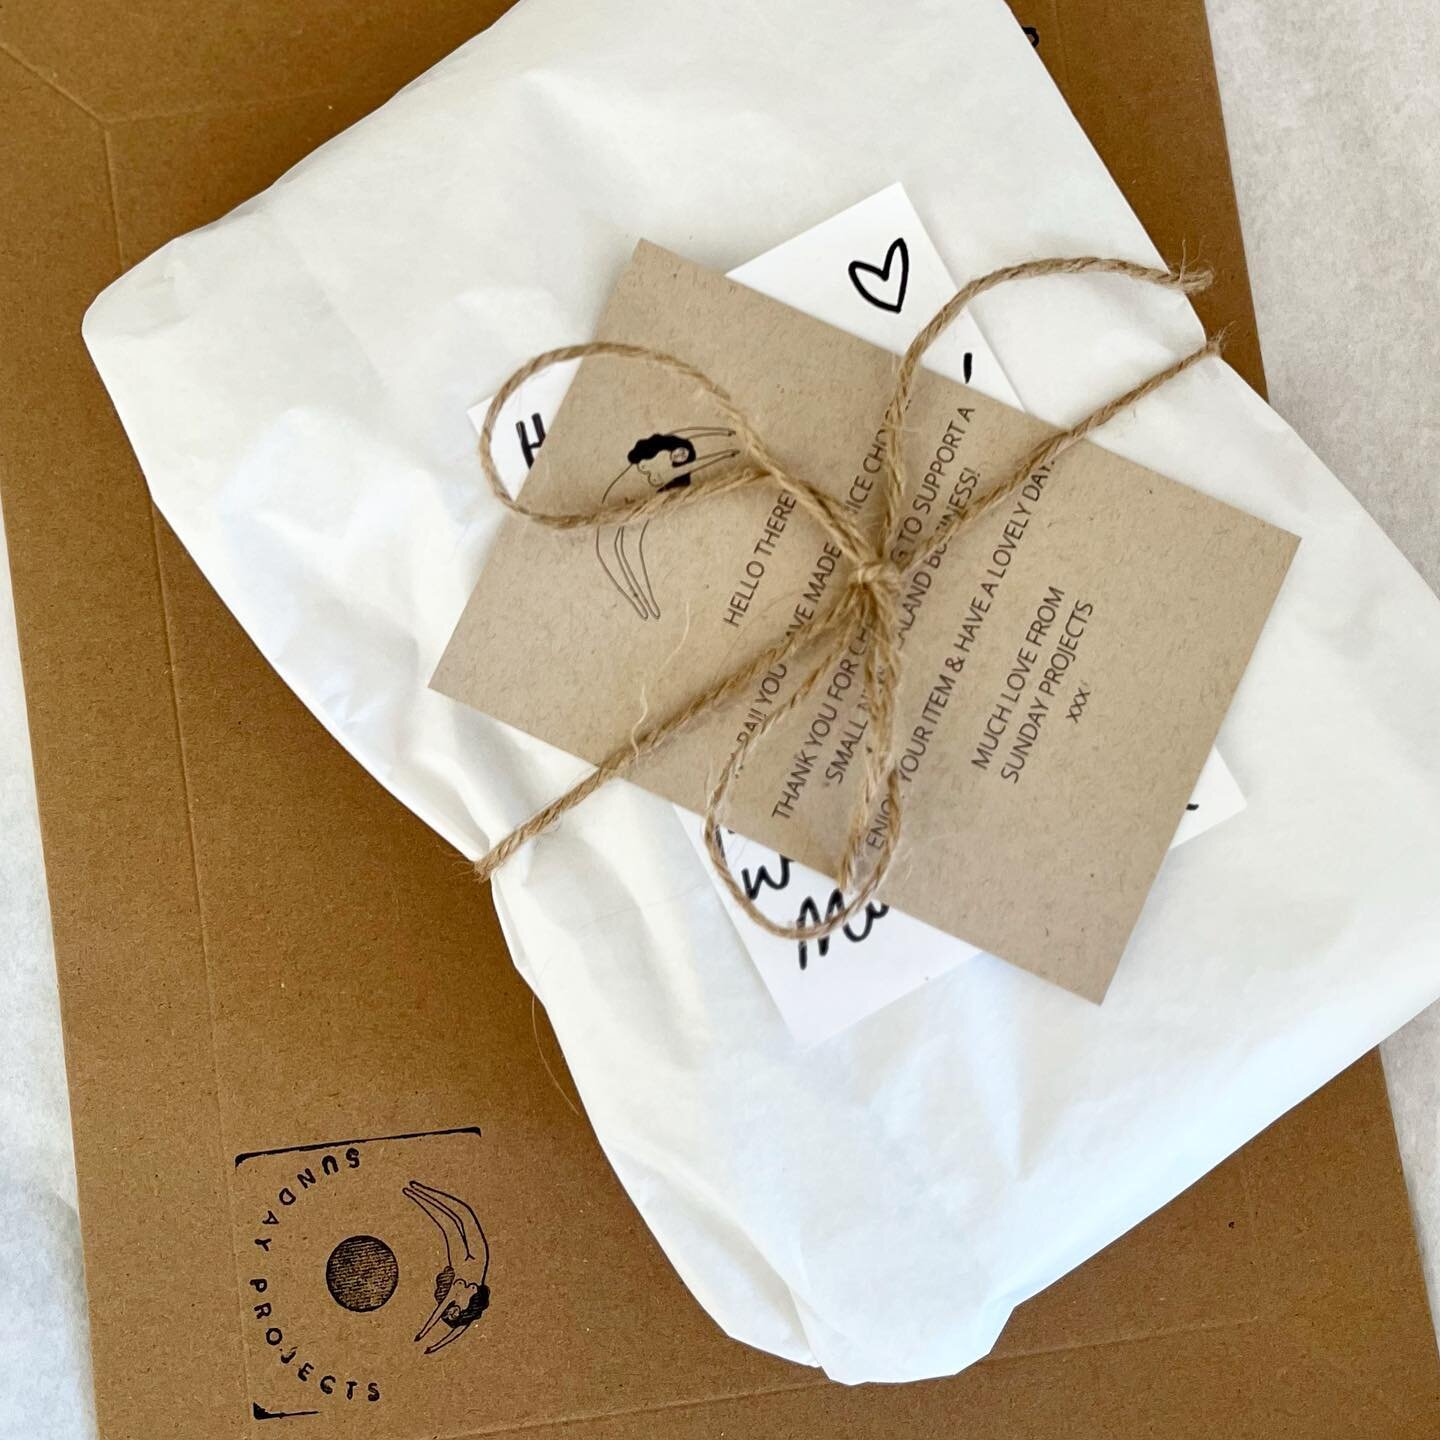 Little linen parcels heading away! Thank you so much to everyone who makes an order, wrapping them up is the best. 🕊️